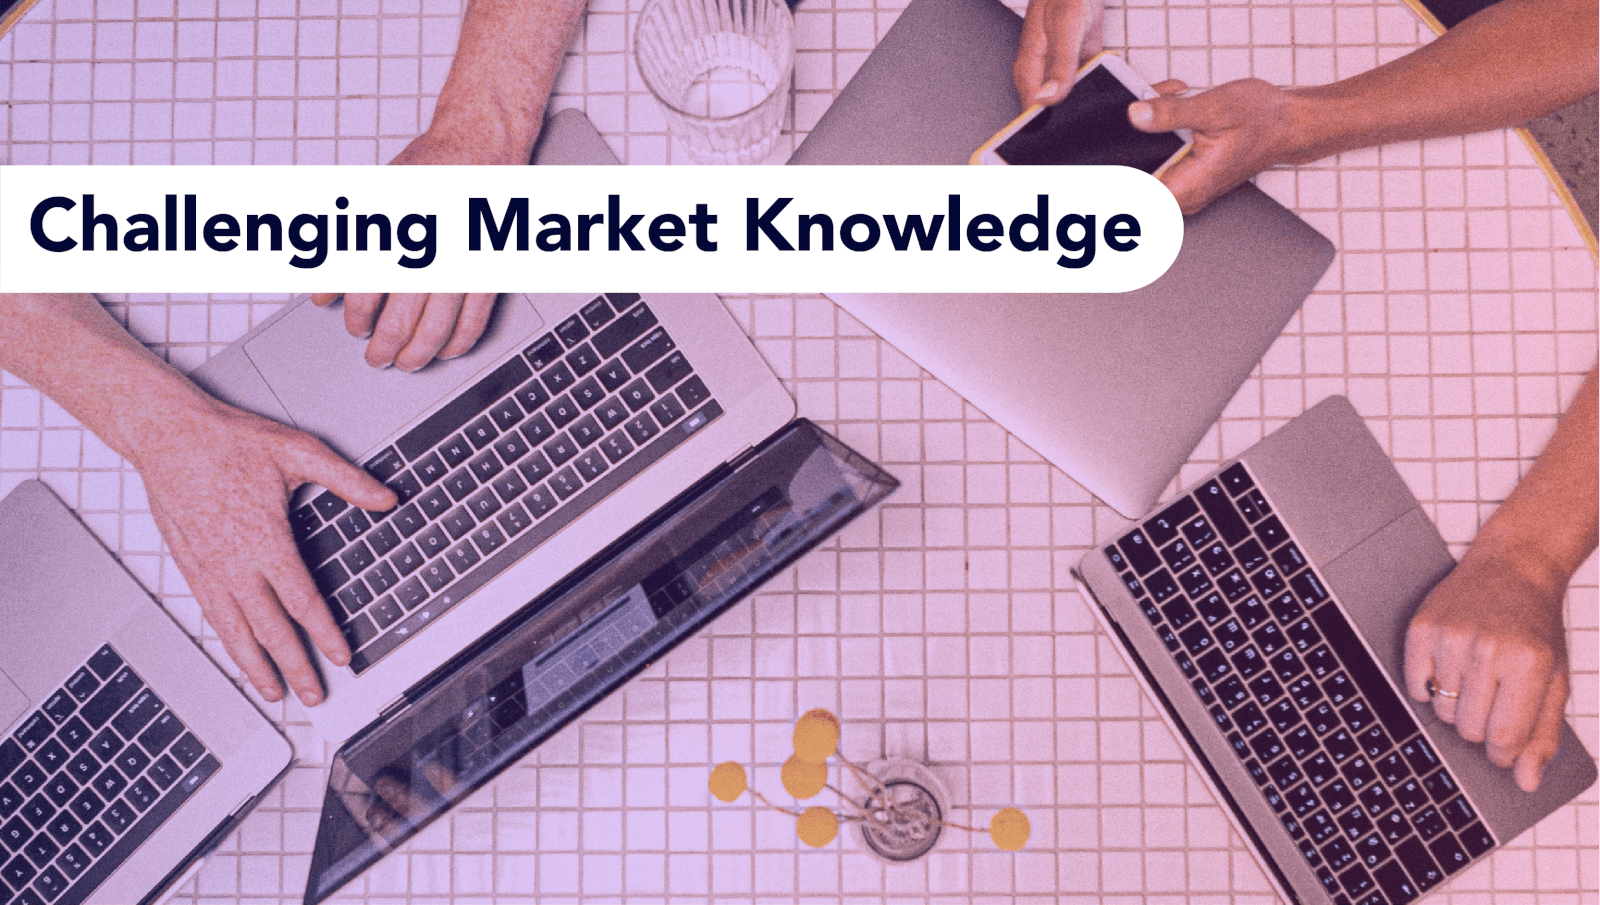 When was the last time you challenged your market knowledge?